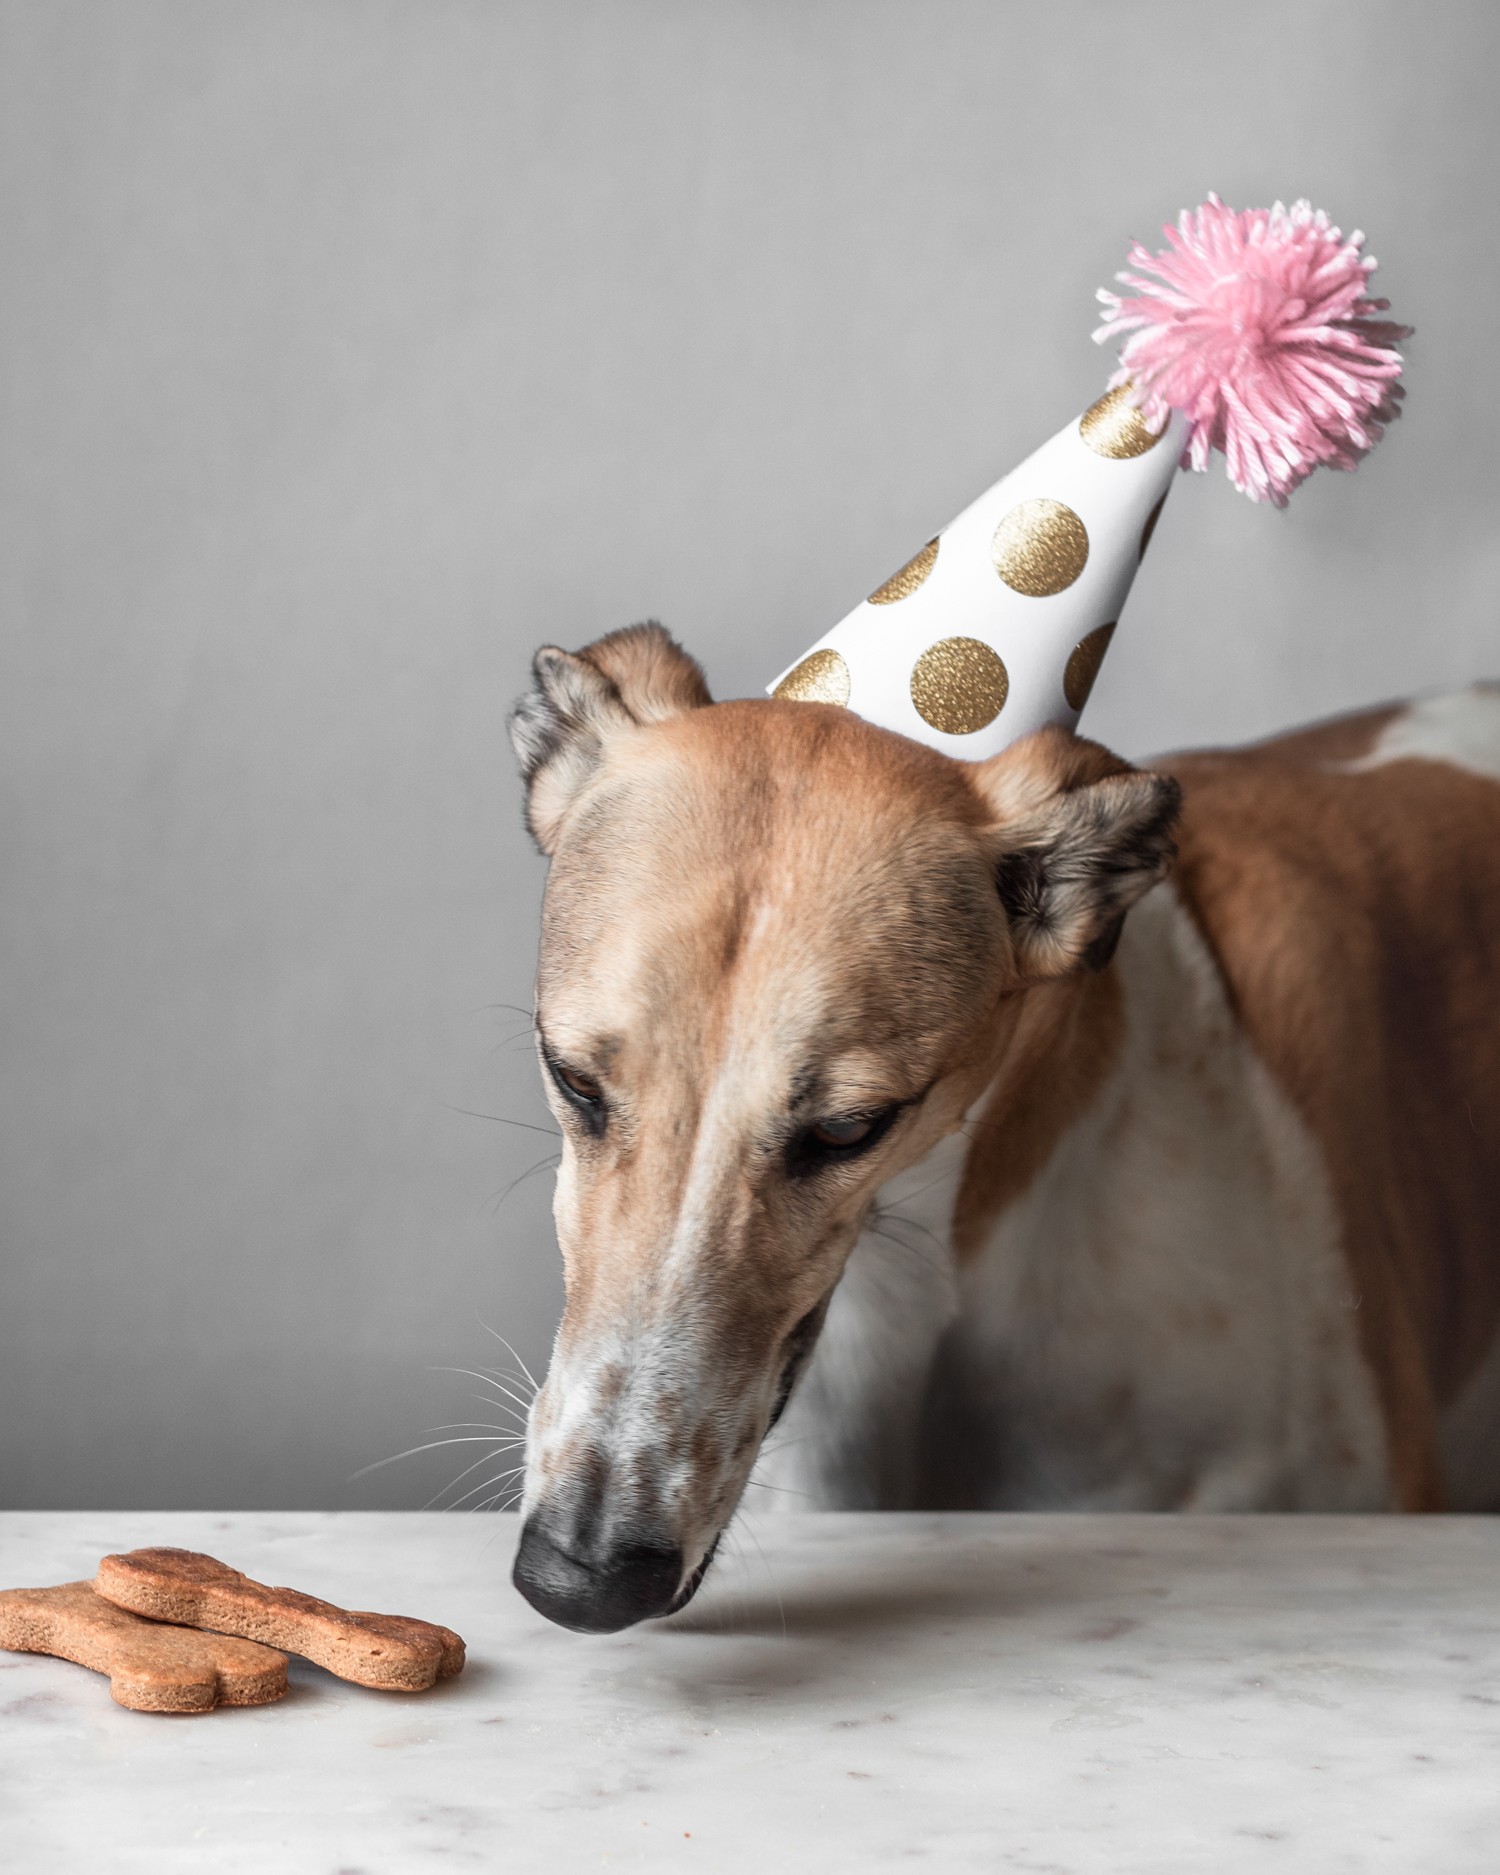 Bell the greyhound eating her birthday treats!